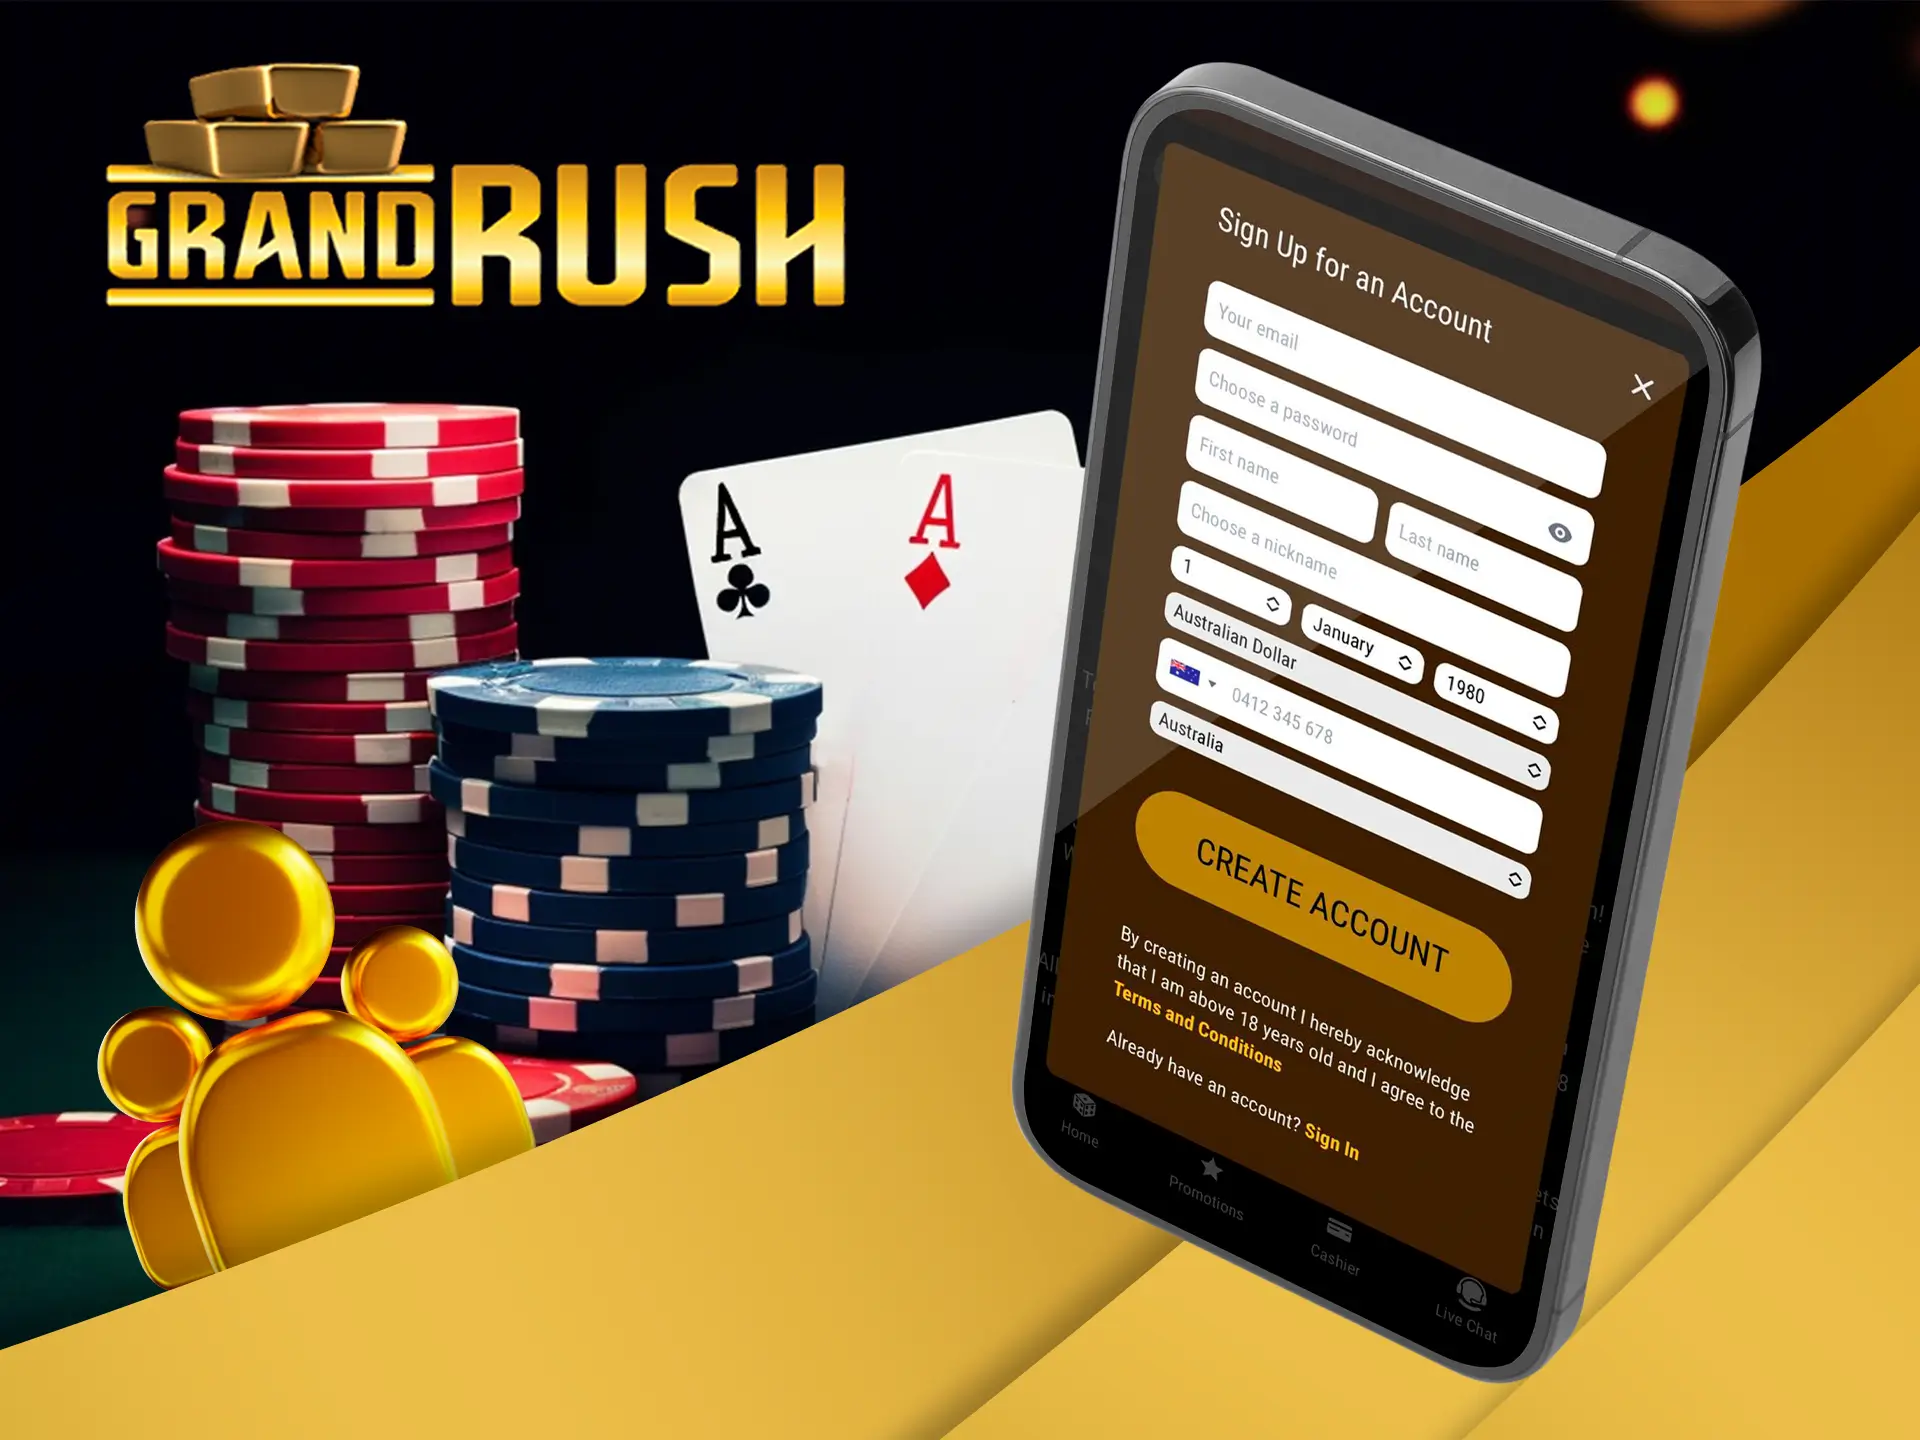 Register in the Grand Rush mobile app to start playing casino games.